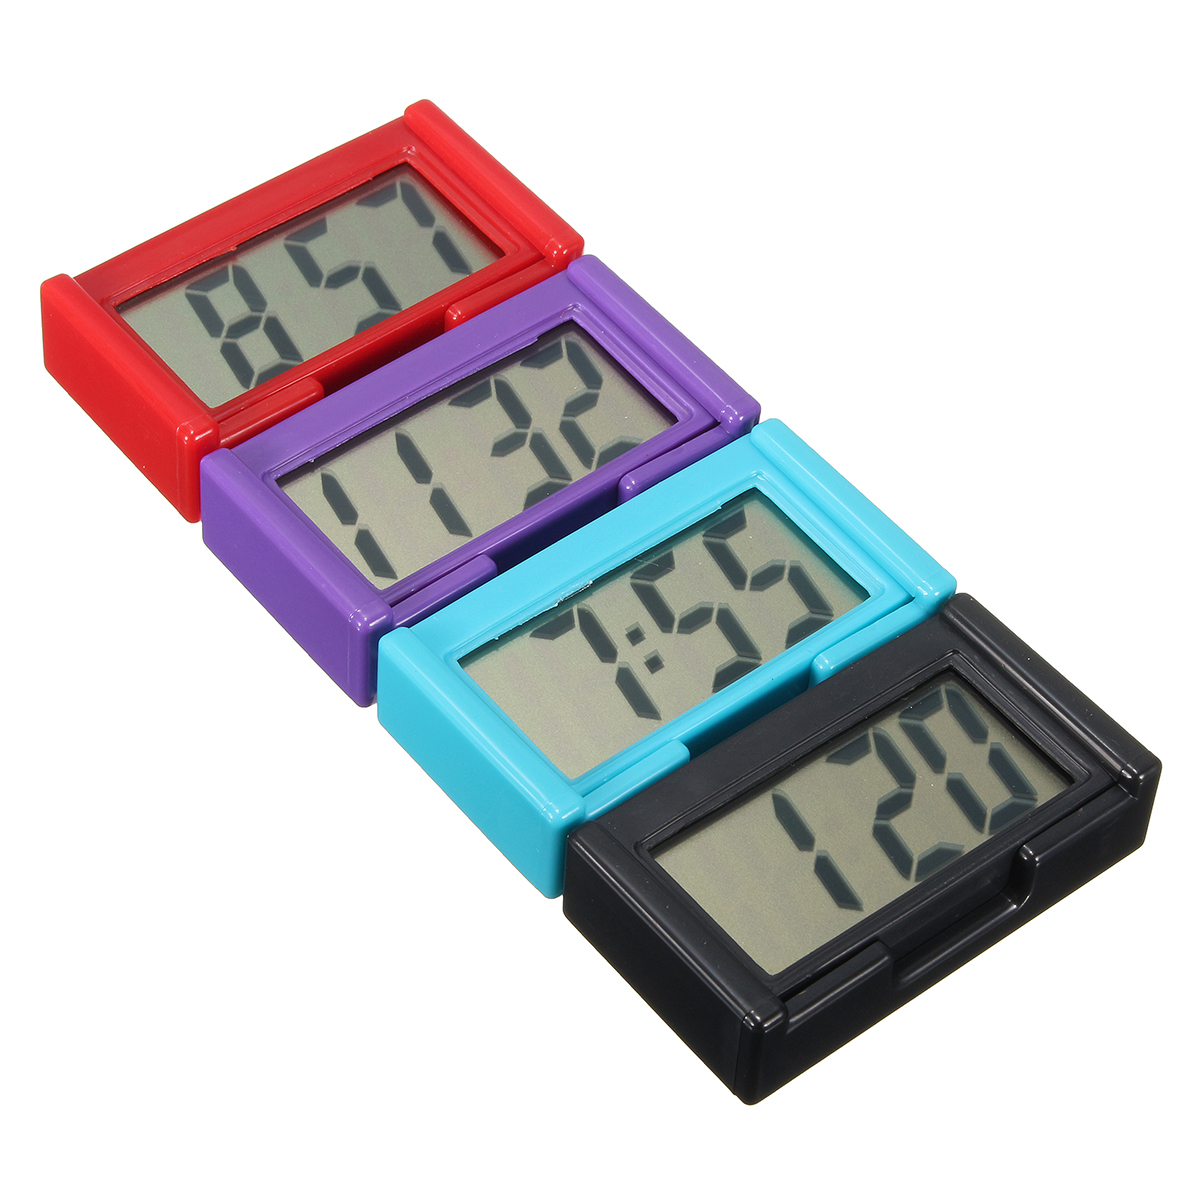 4 Colors Automotive Digital Car LCD Clock Self-Adhesive Stick On Time Portable 2